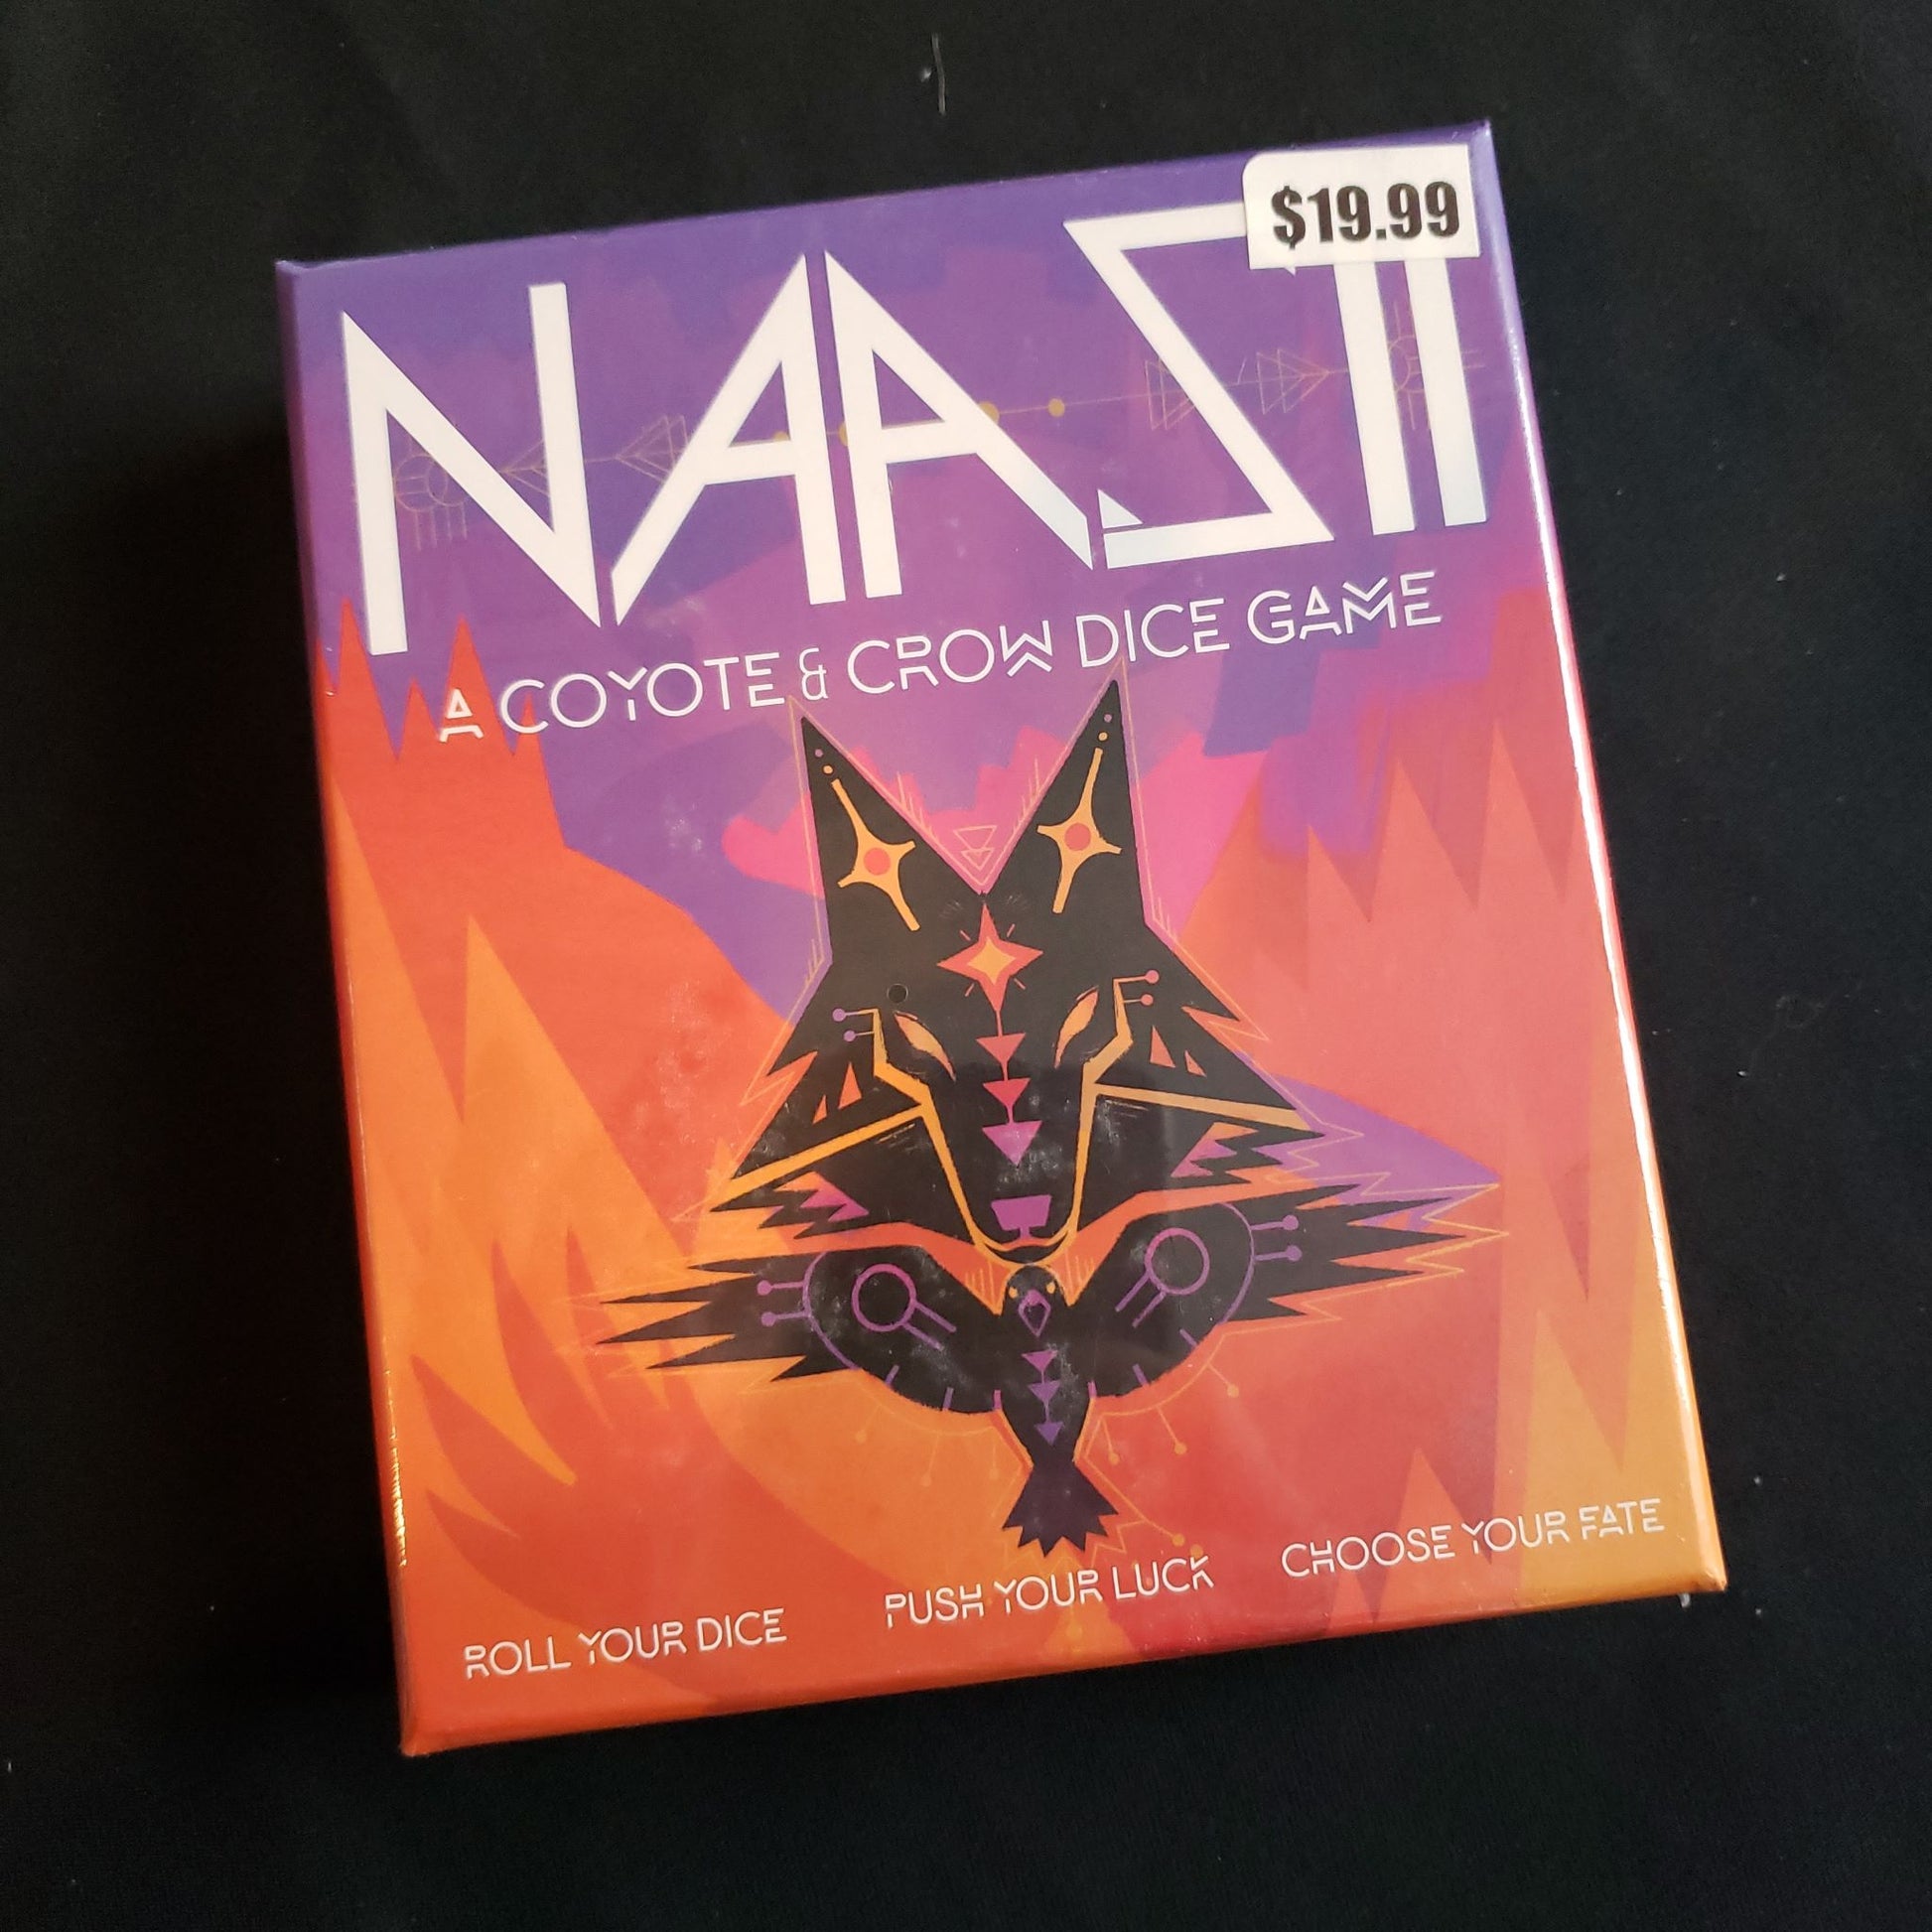 Image shows the front cover of the box of the Naasii dice game